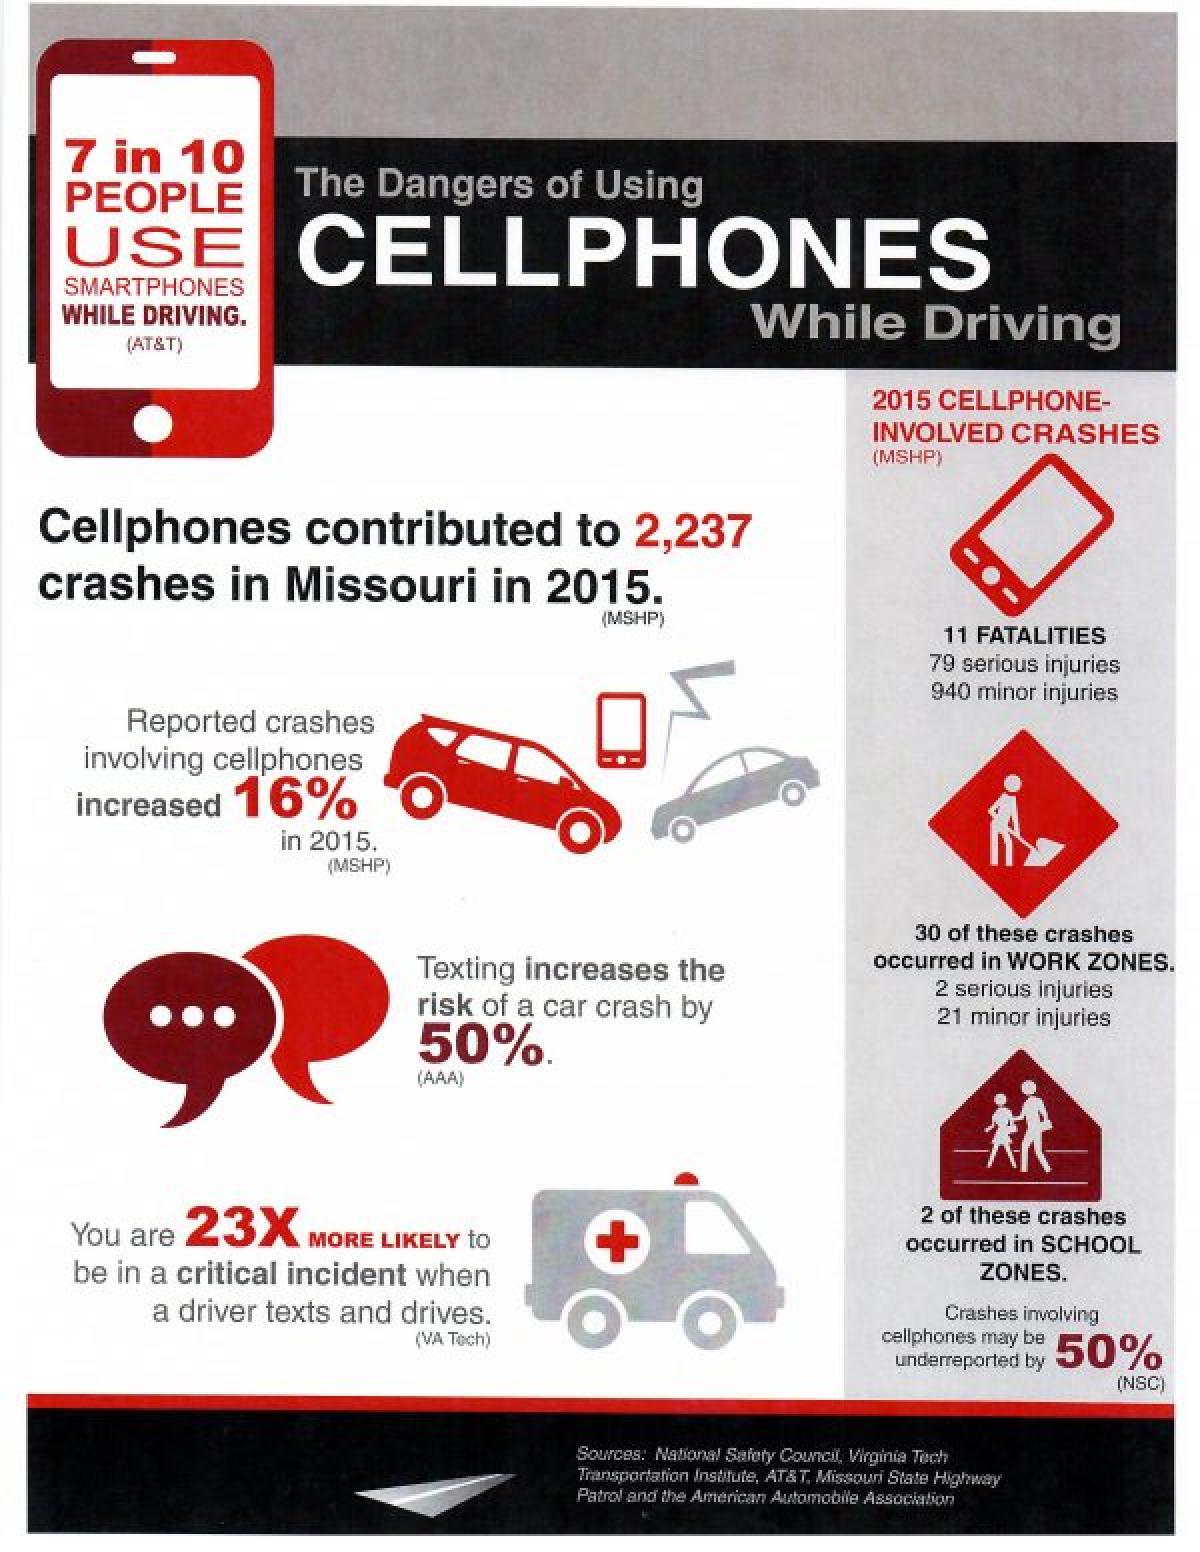 The Dangers of Using Cellphones While Driving statistics flier